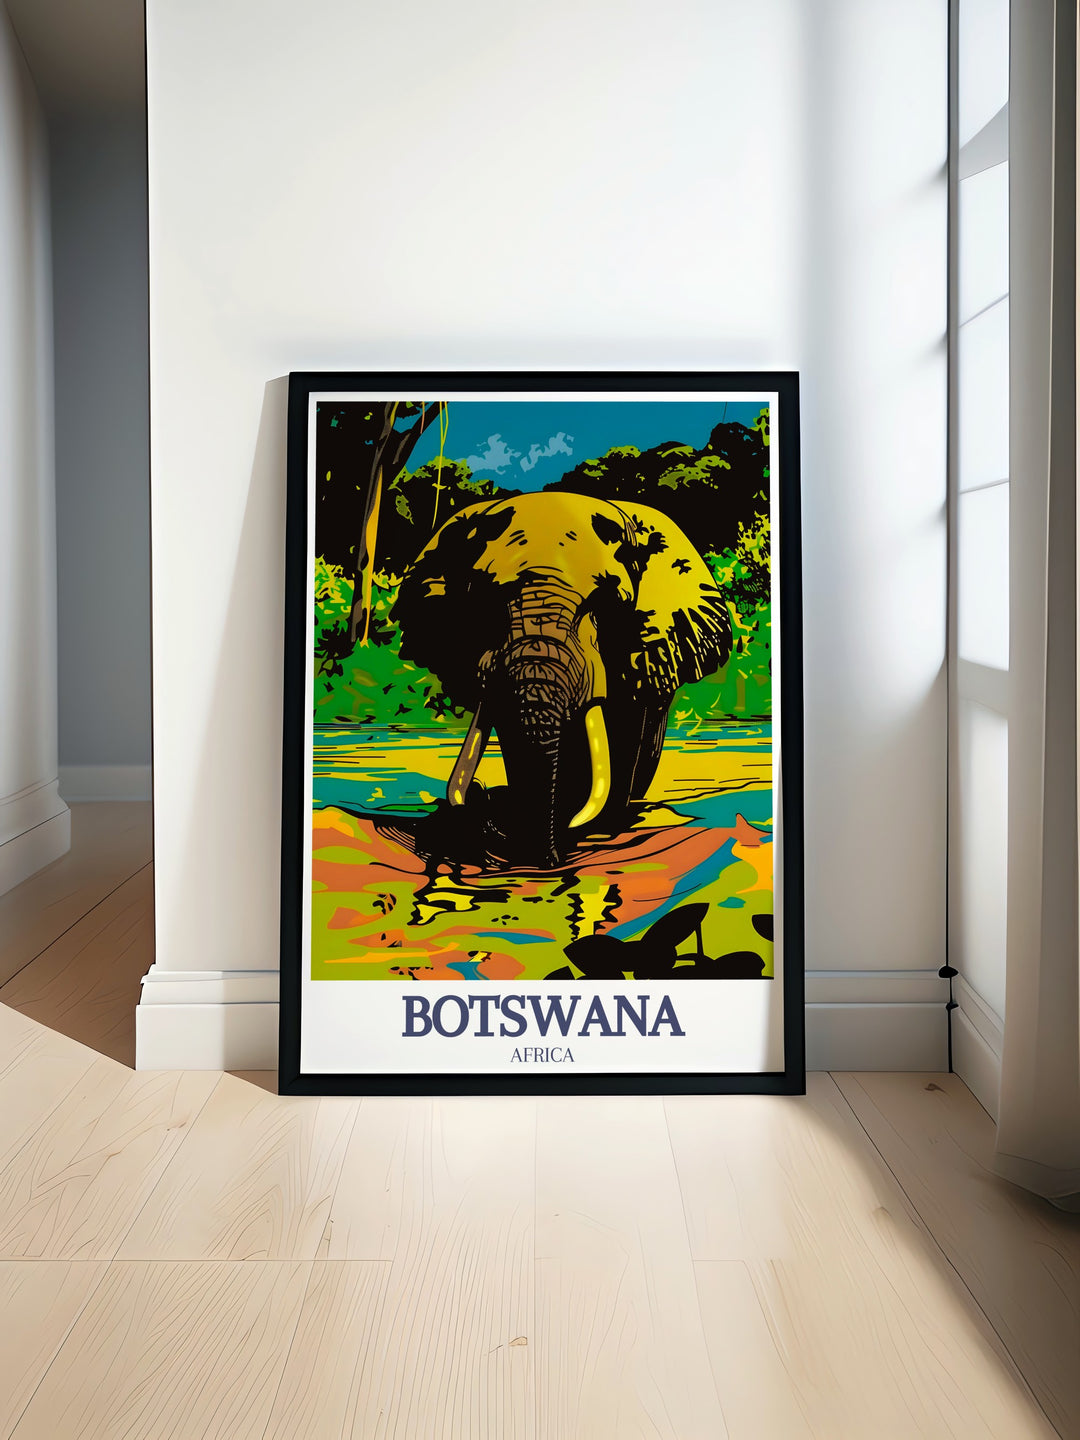 Stunning Botswana wall art featuring the Okavango Delta and Moremi Game Reserve. Discover the beauty of these regions with vibrant Botswana prints perfect for home decor and art lovers seeking unique travel inspired artwork.